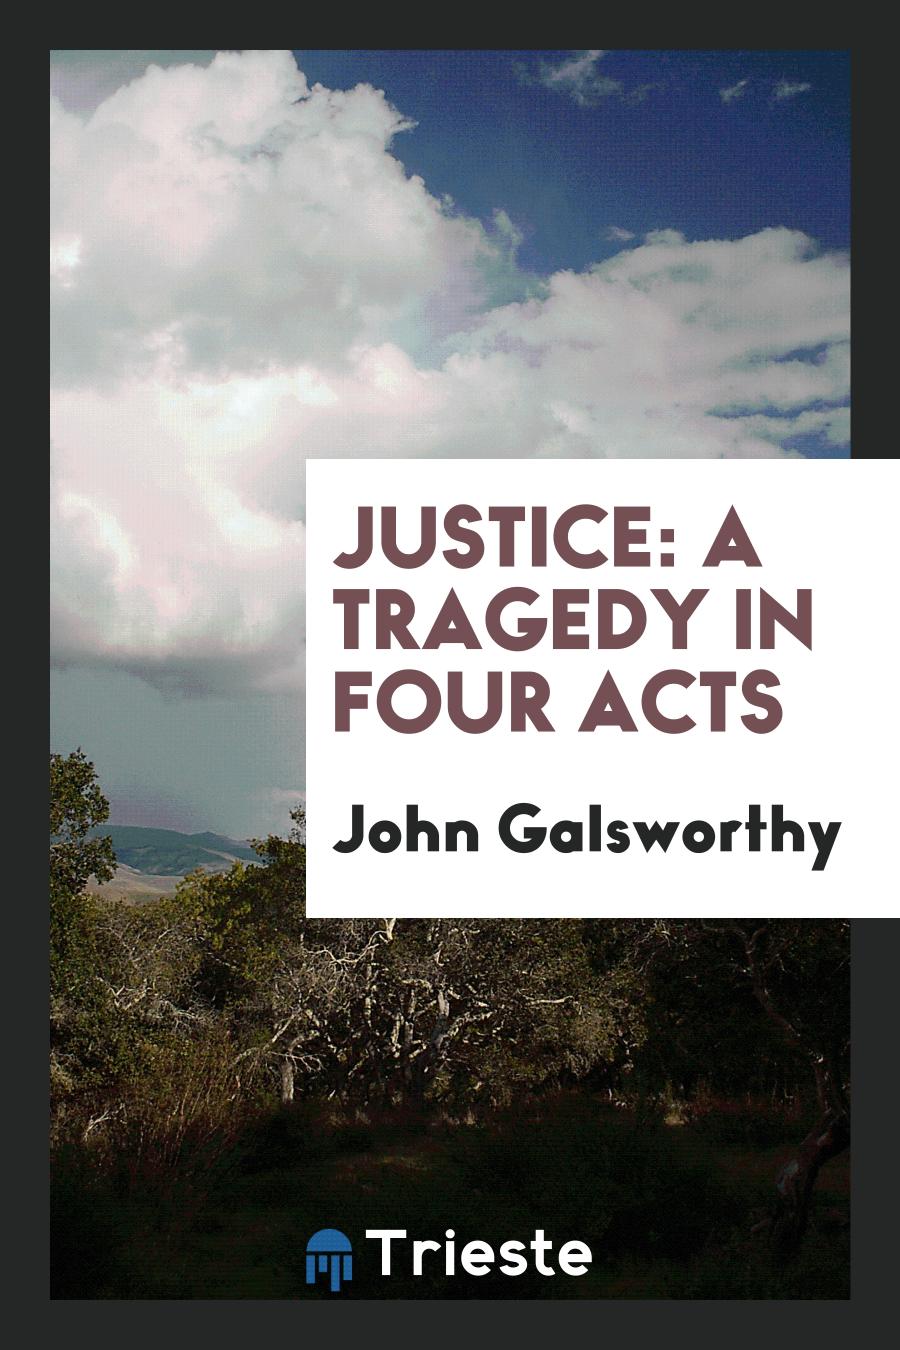 John Galsworthy - Justice: A Tragedy in Four Acts